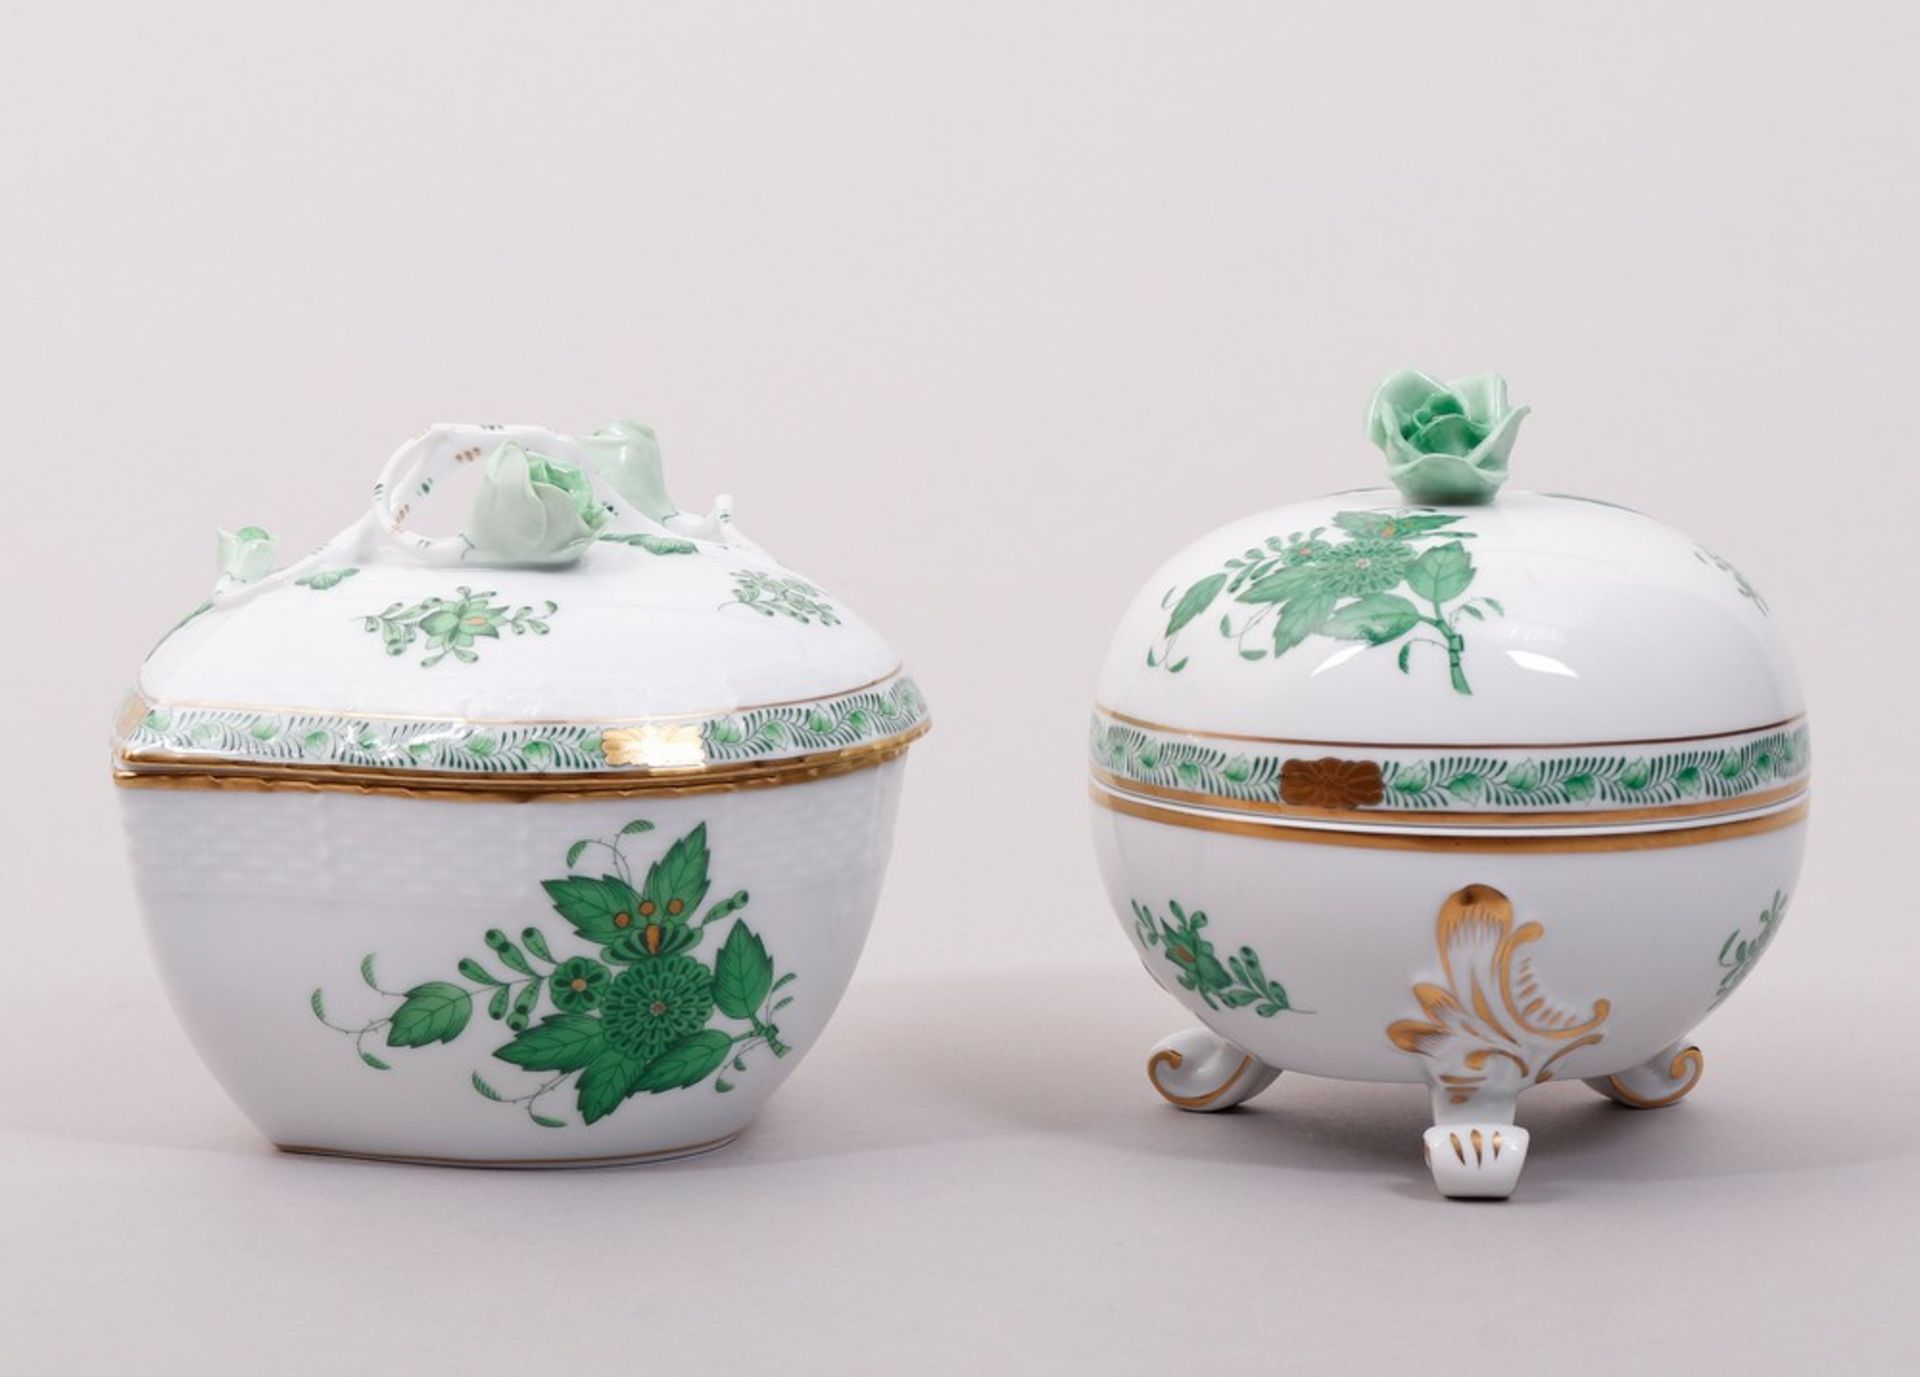 Two lidded boxes, Herend, Hungary, "Apponyi green" decor, 20th C.